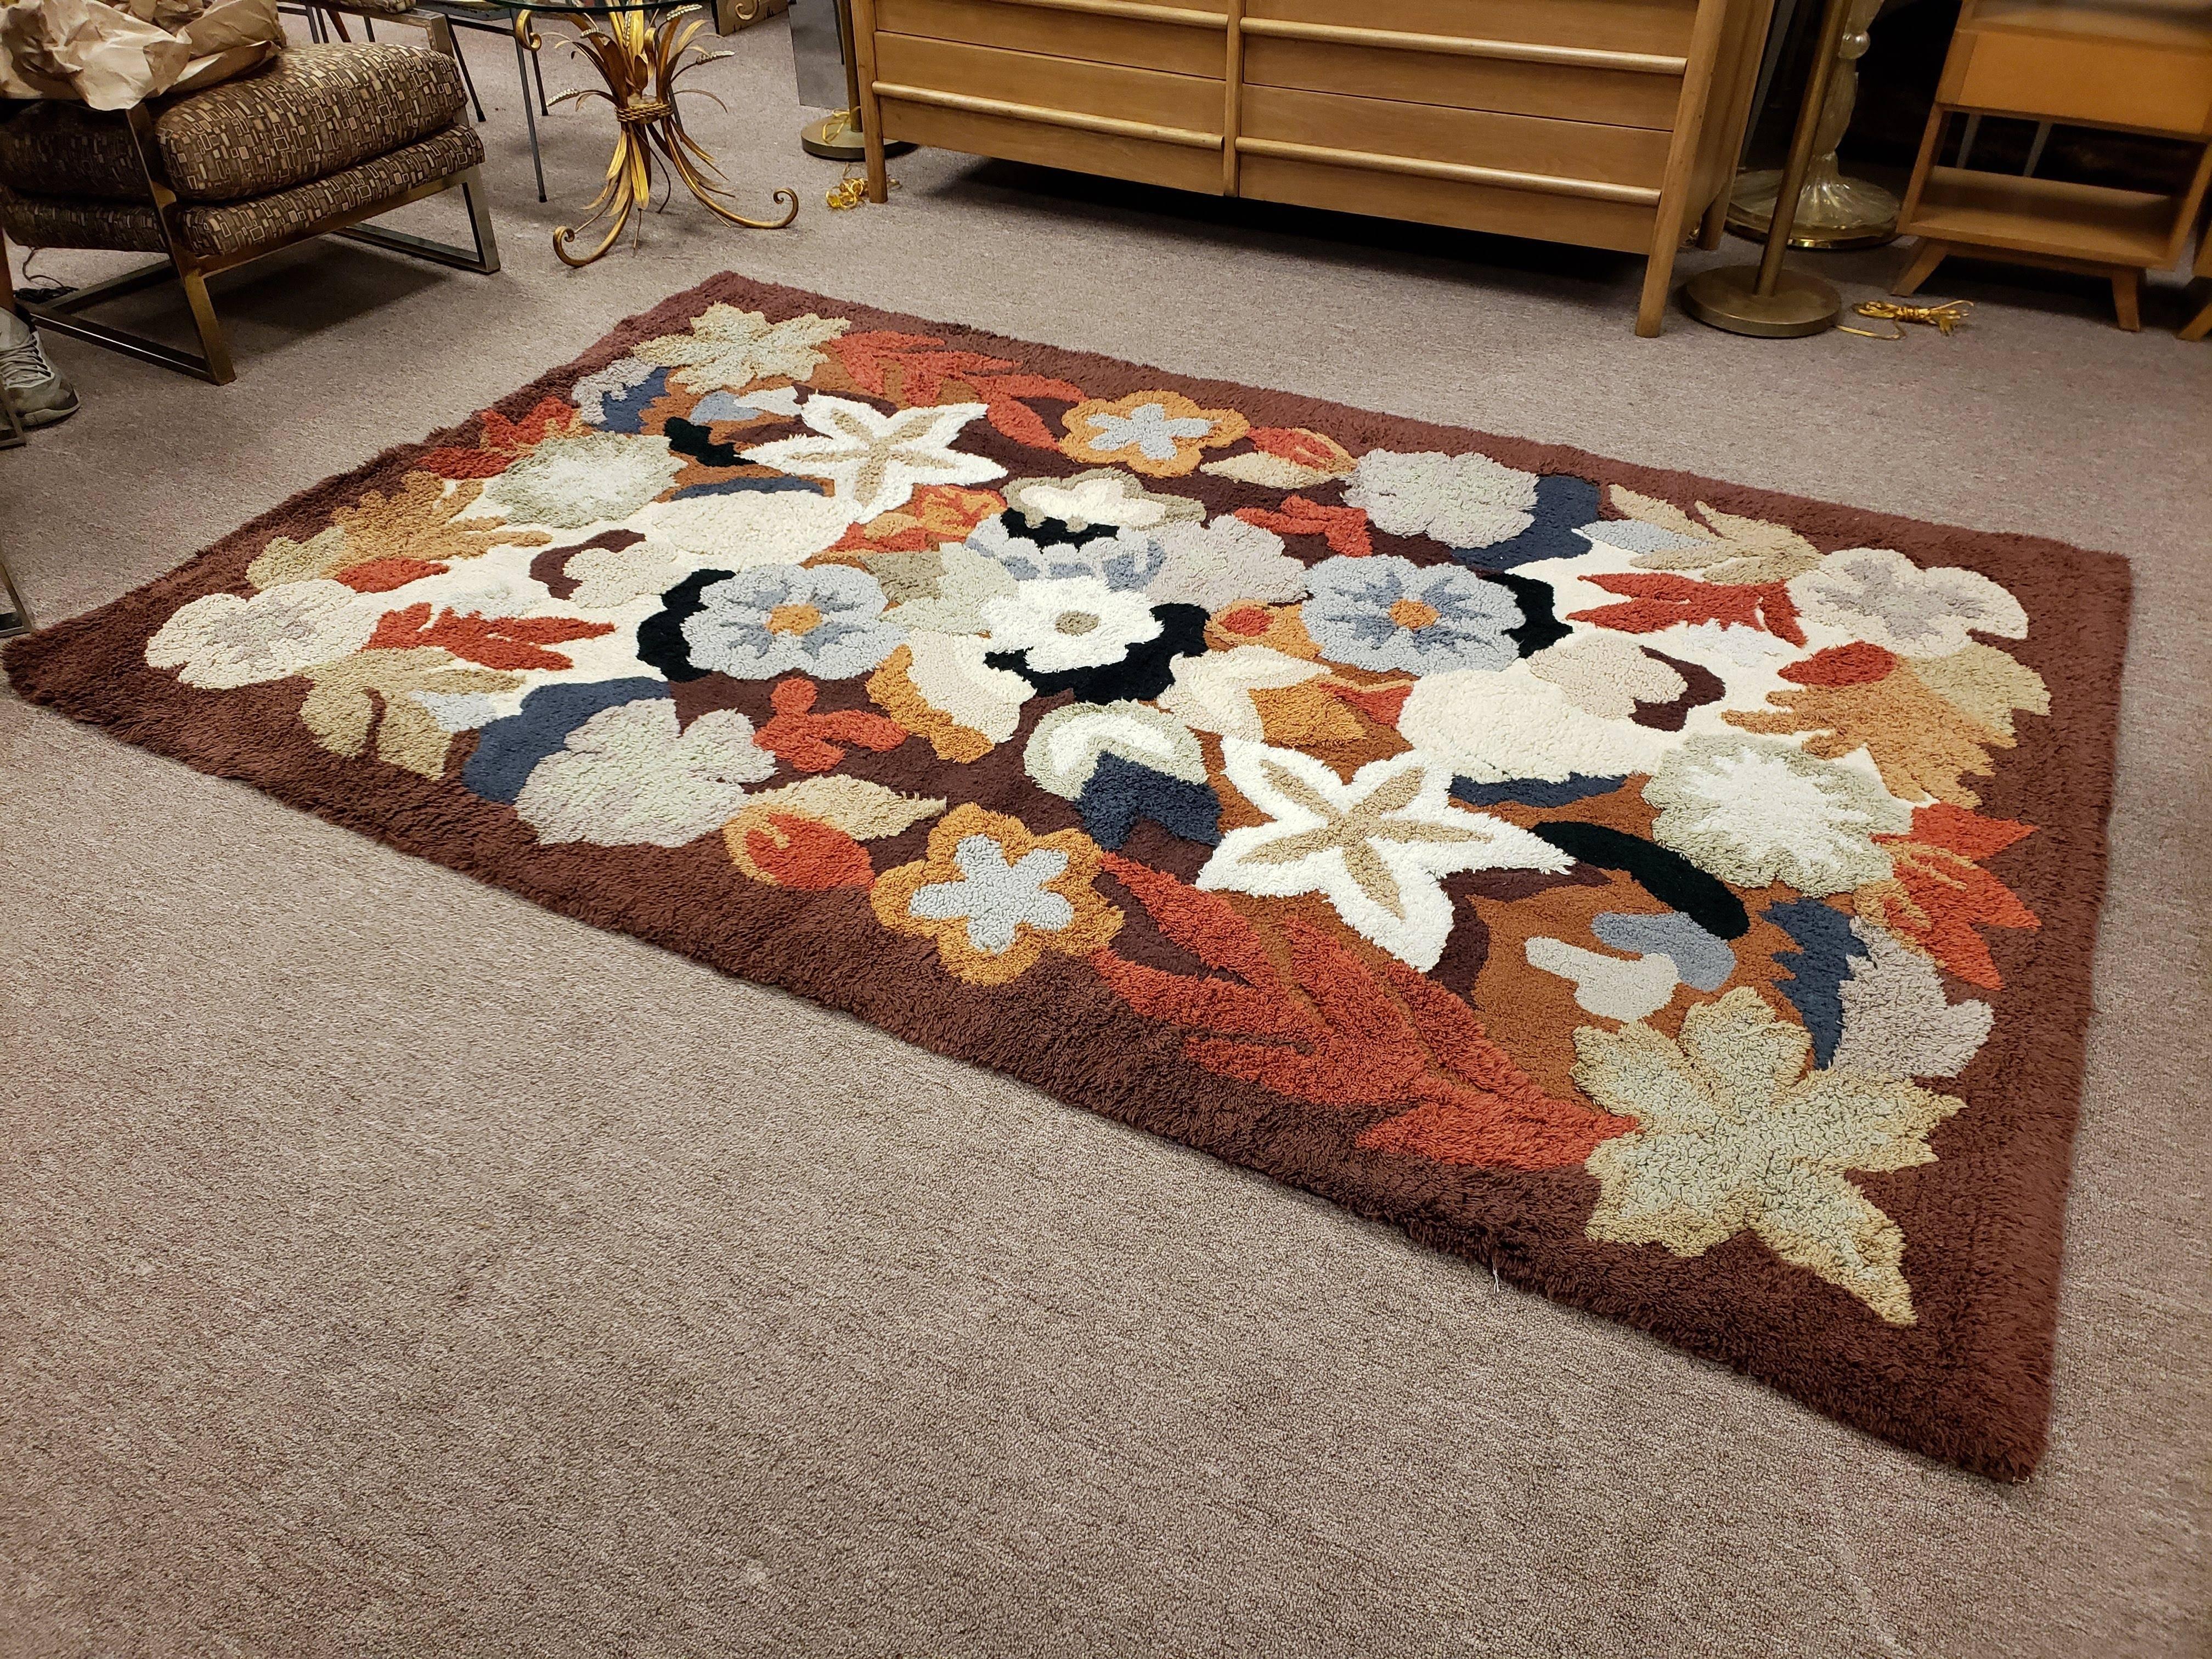 For your consideration is a Mid-Century Modern floral motif hand-knotted wool rug from the 1960s. Just back from being professionally cleaned and ready for your space. It's multi colors consist of burnt orange, blue's and gray's with touches of